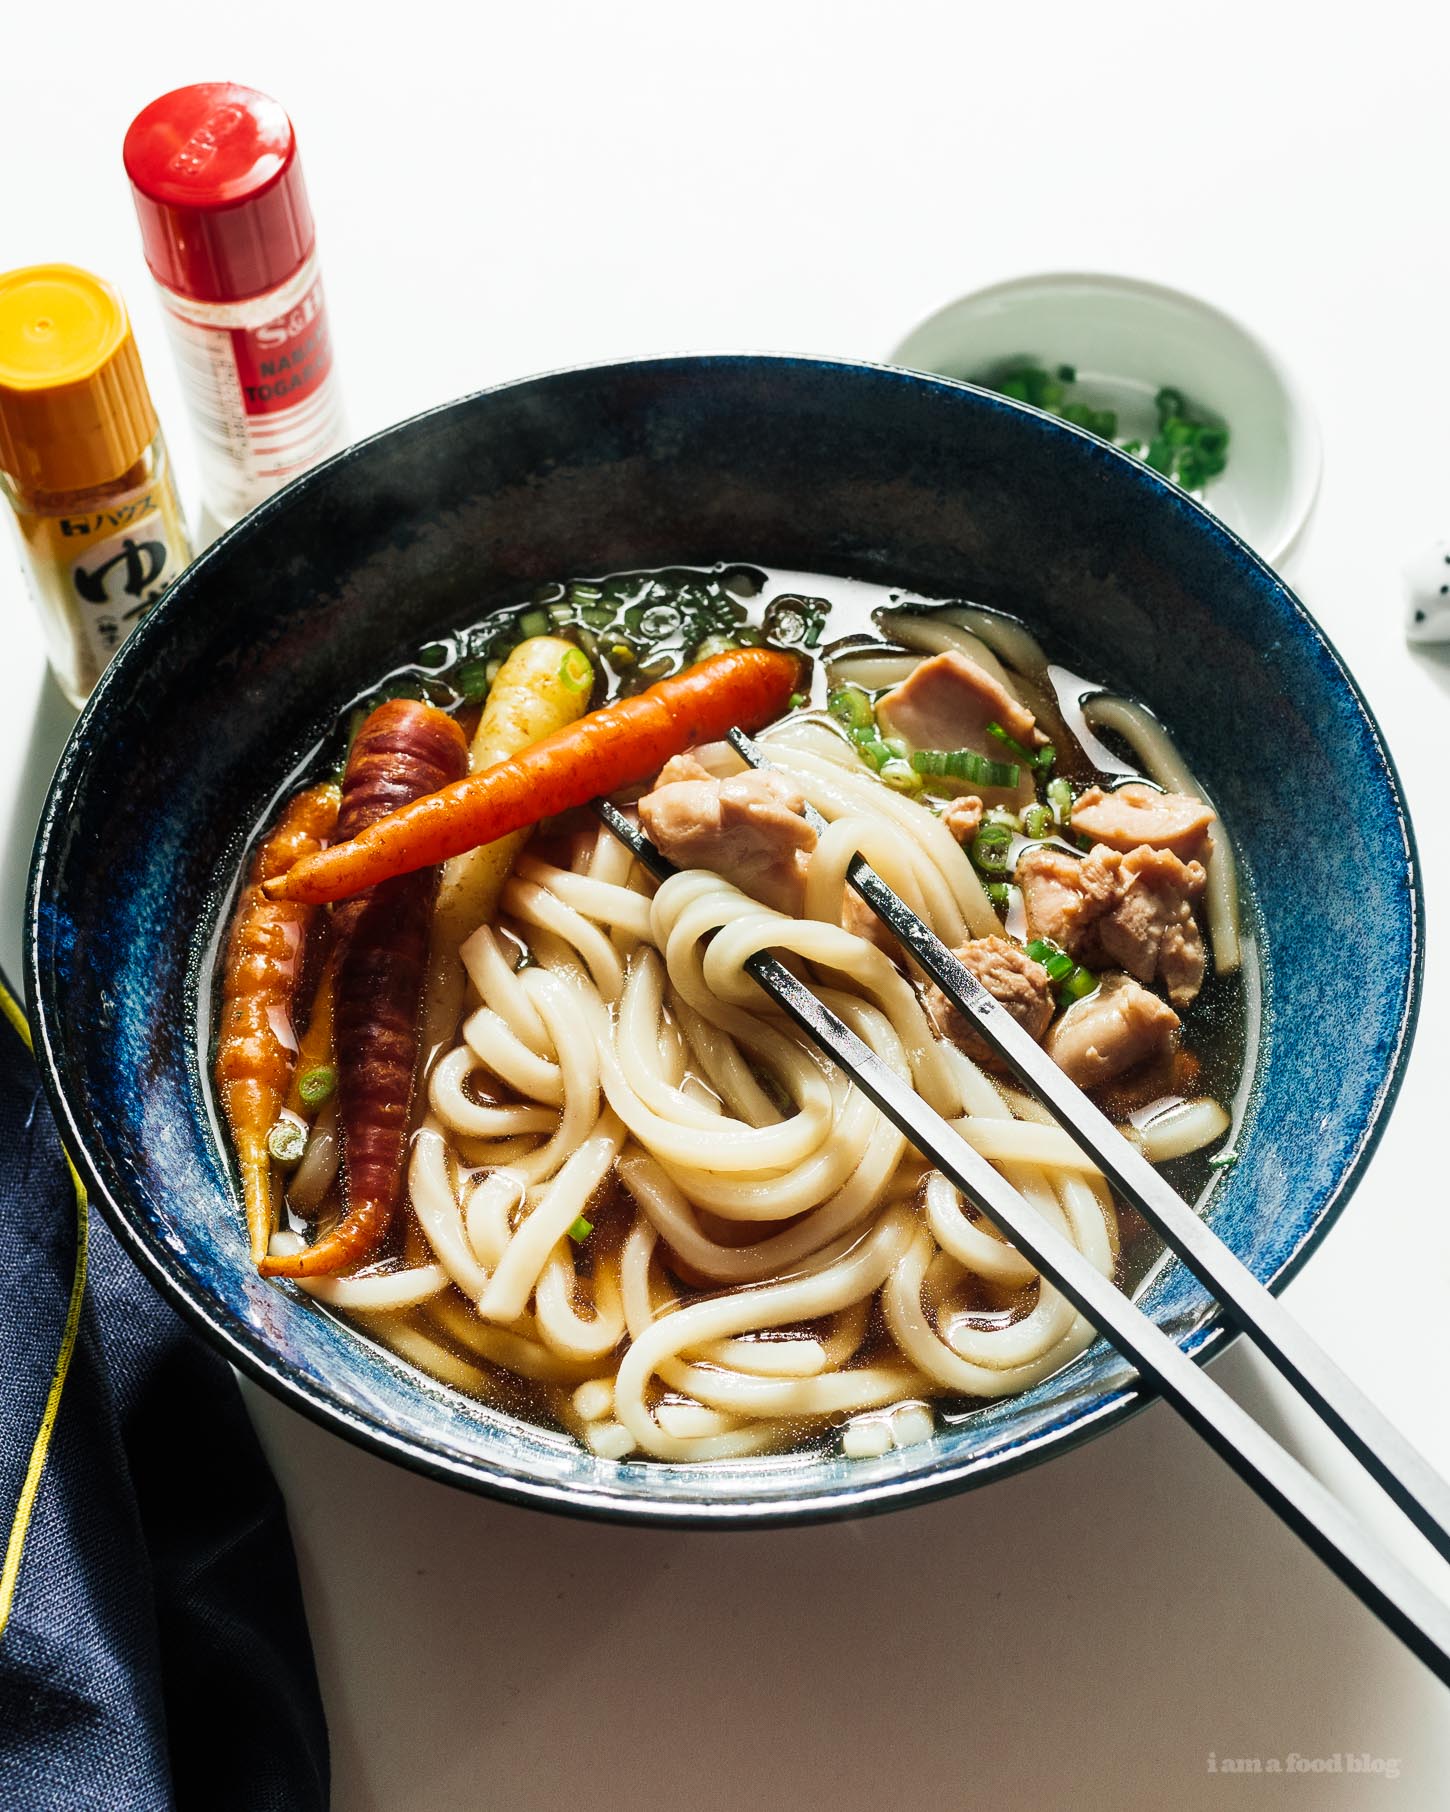 Easy and Fast Chicken Udon Recipe | www.iamafoodblog.com